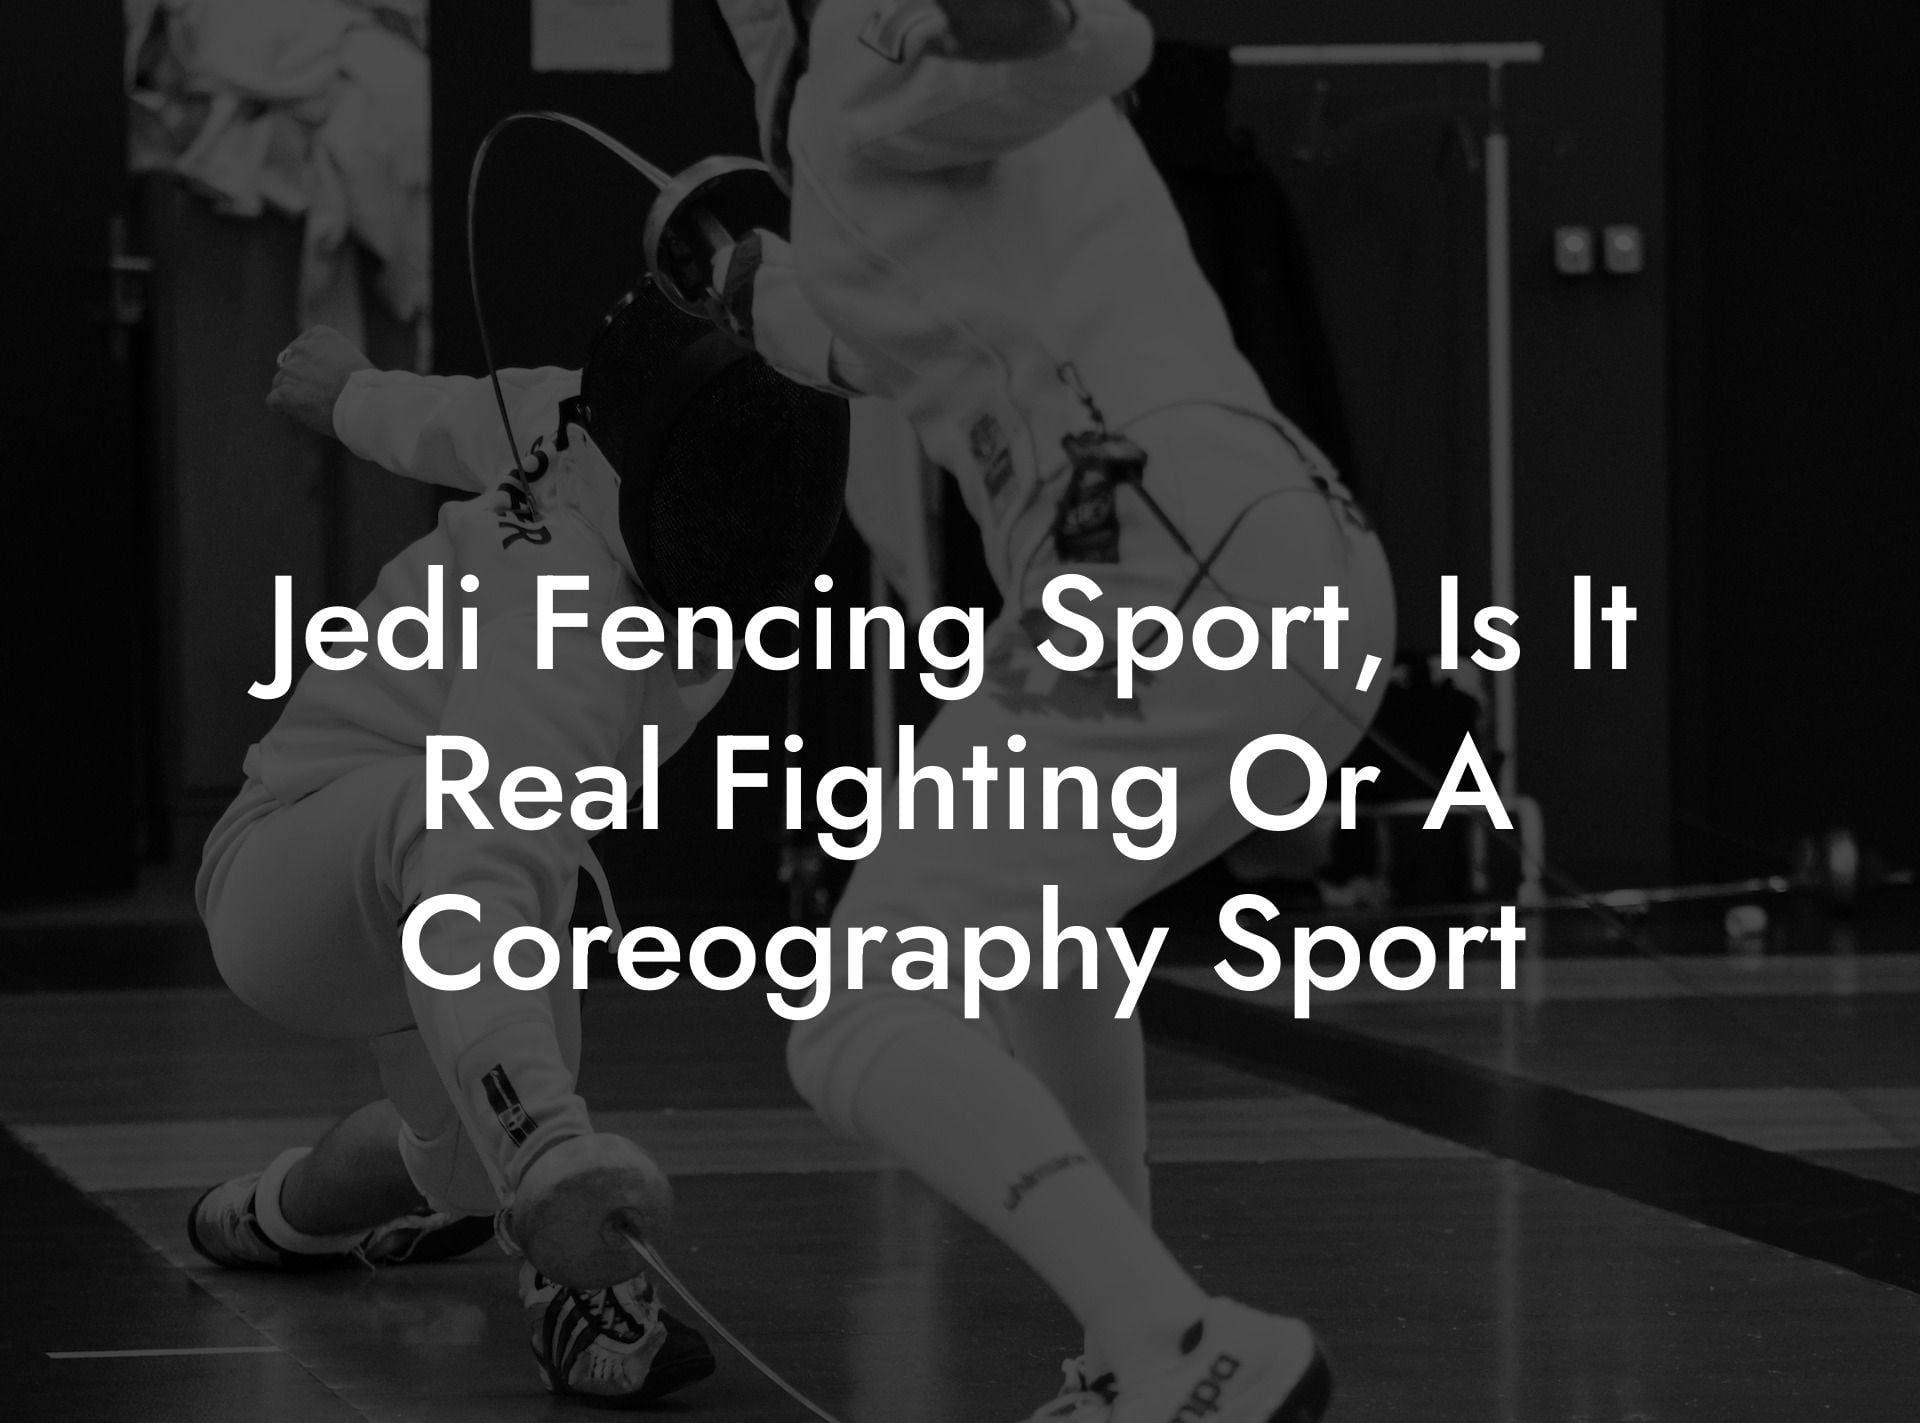 Jedi Fencing Sport, Is It Real Fighting Or A Coreography Sport